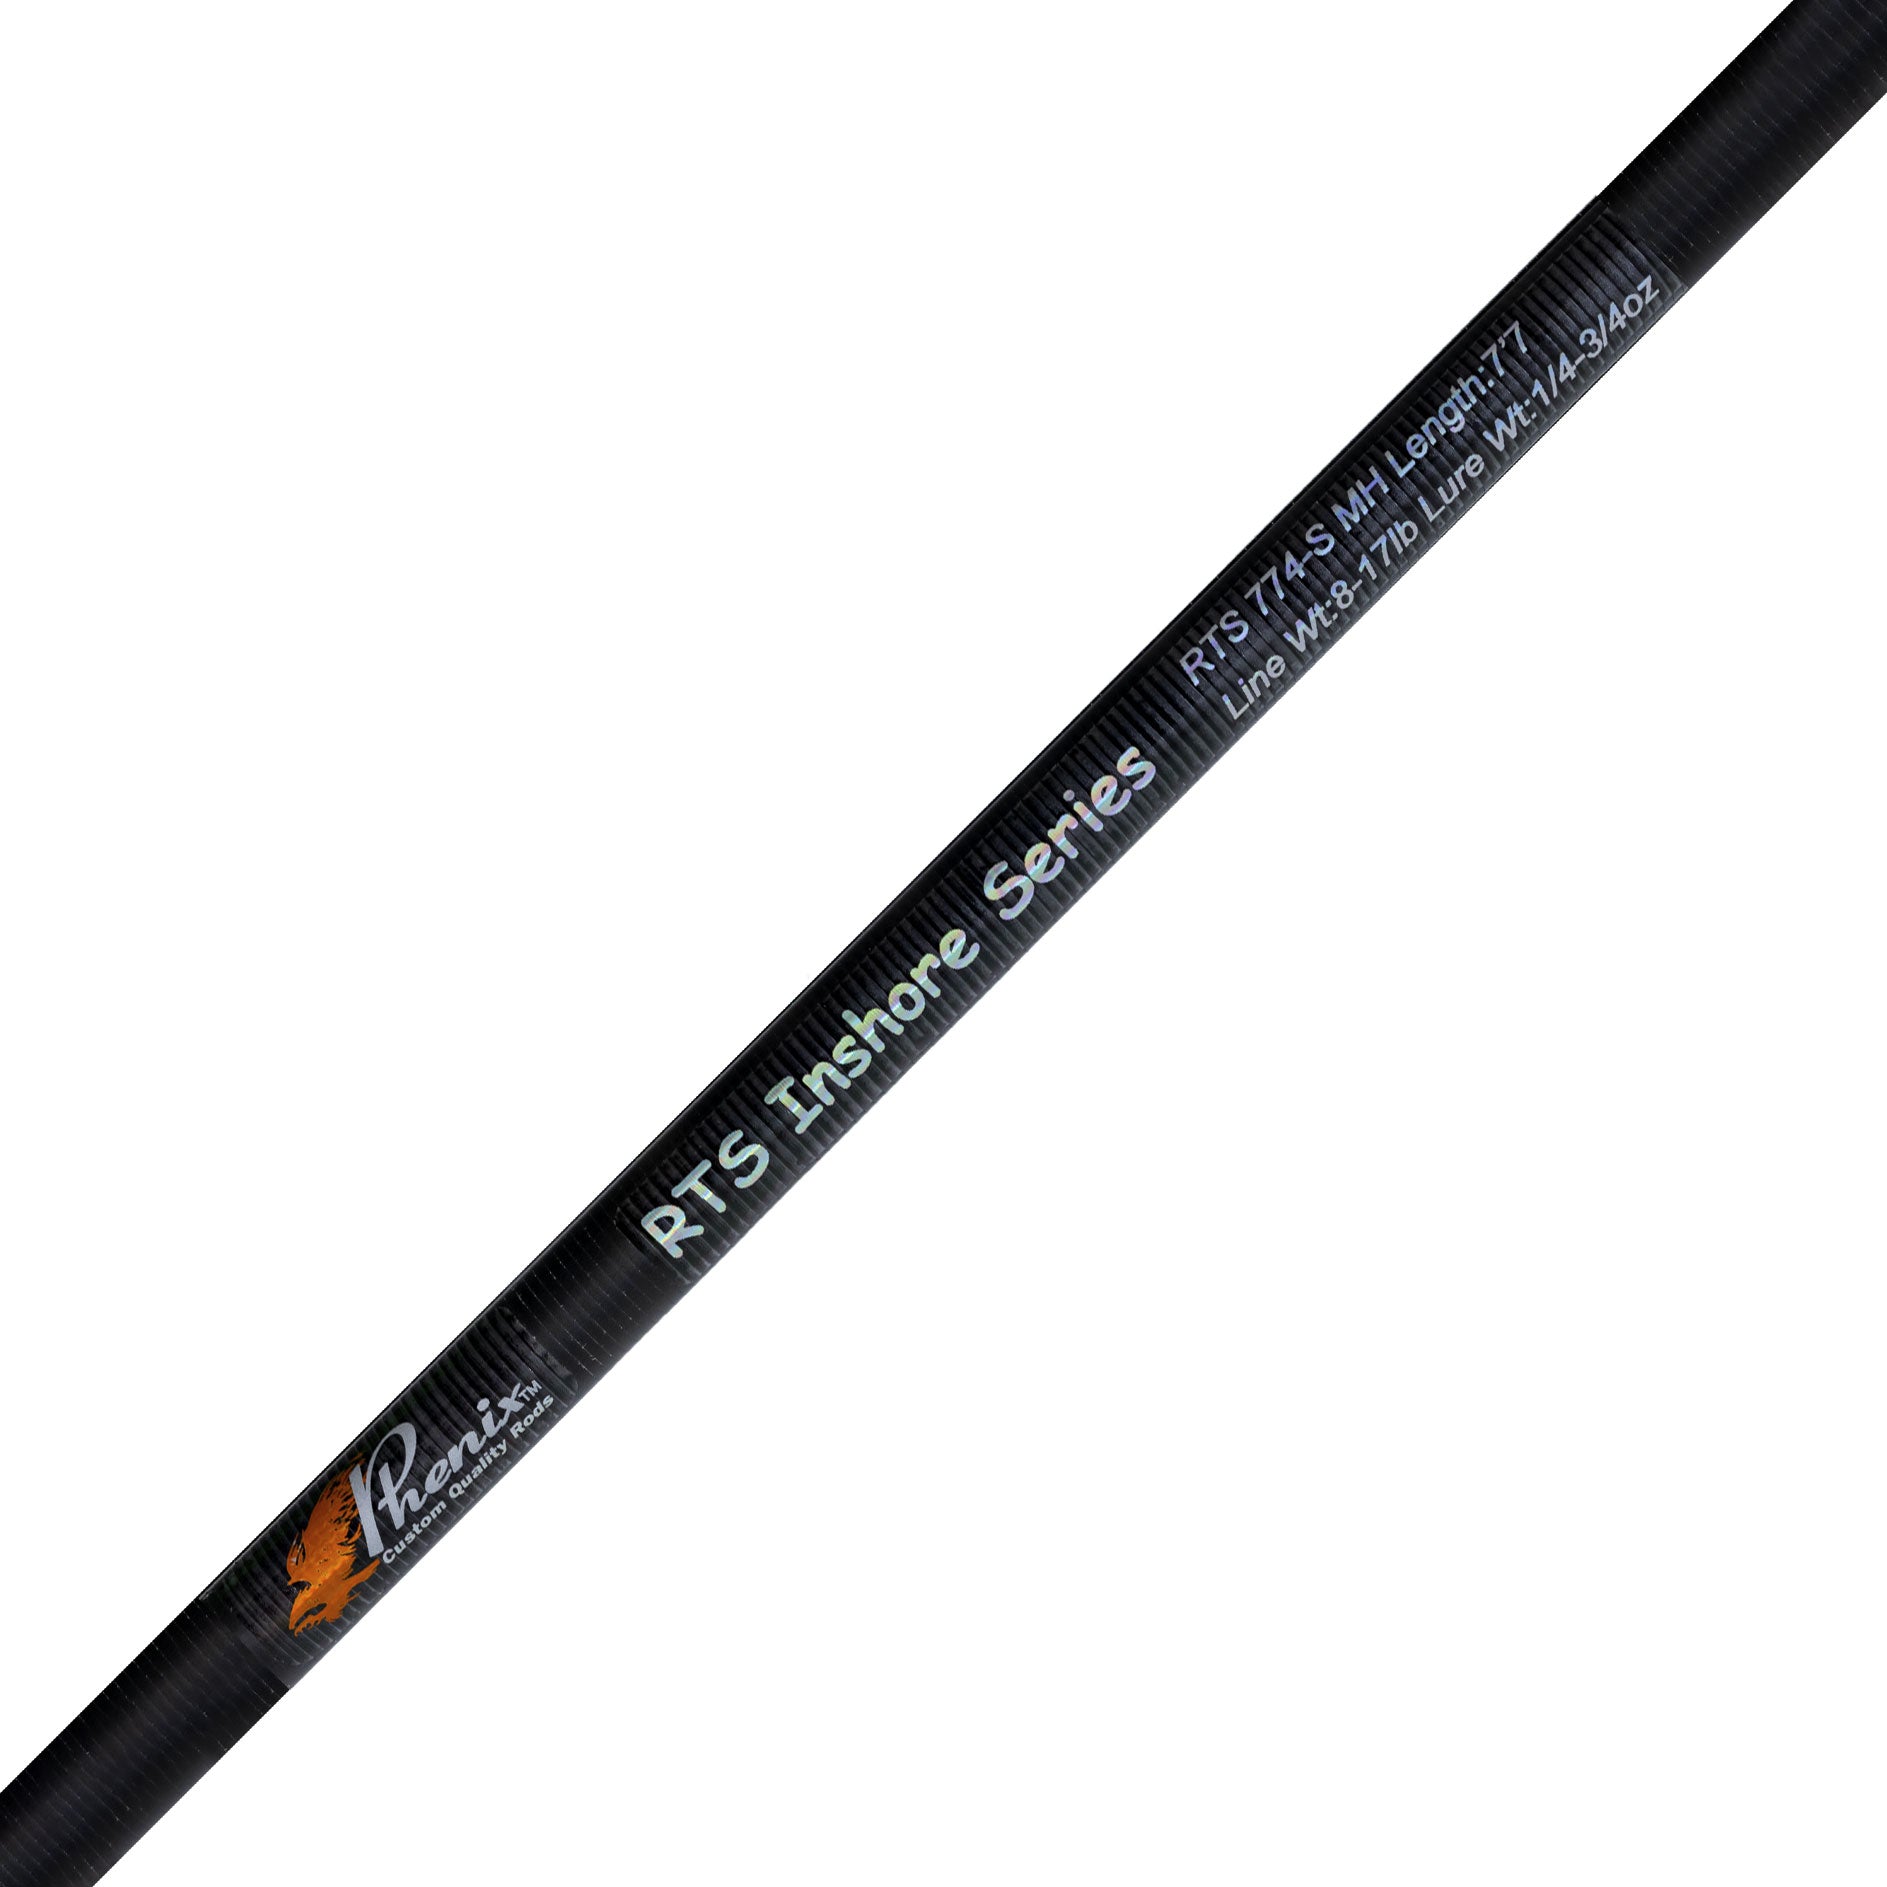 RTS Inshore Spinning Rod Blank B-RTS-S 774MH